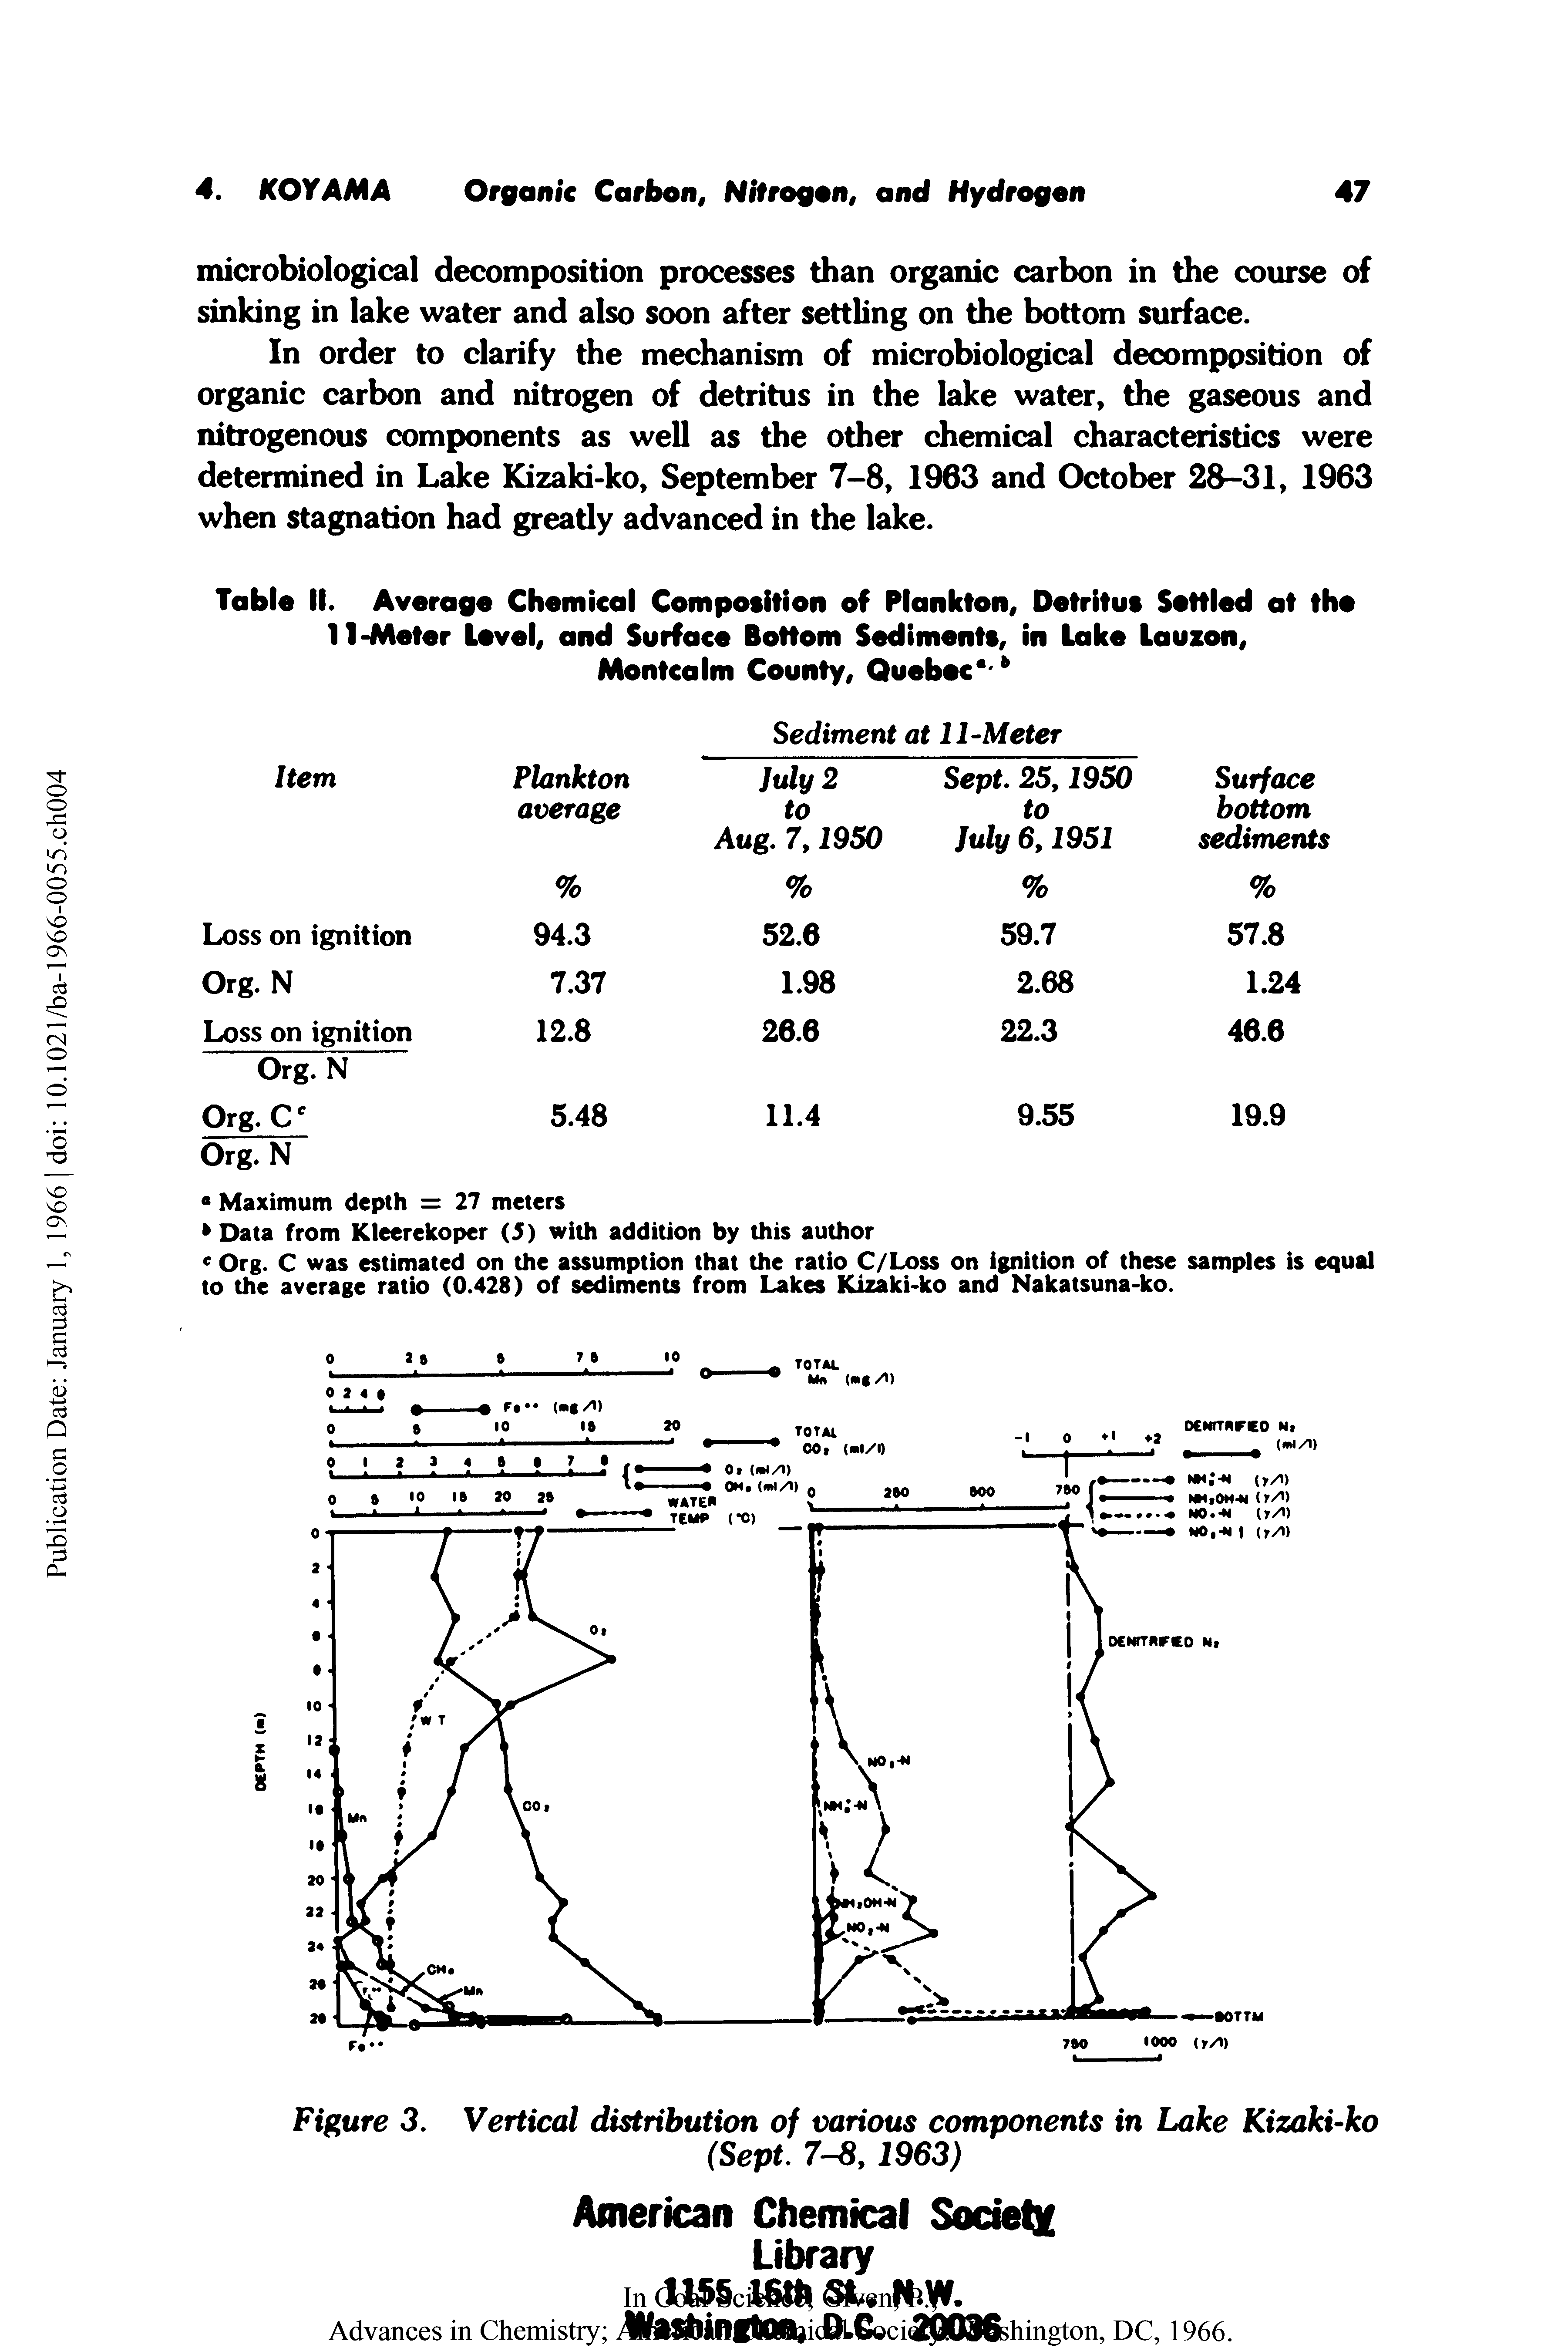 Table II. Average Chemical Composition of Plankton, Detritus Settled at the 11-Meter level, and Surface Bottom Sediments, in lake Lauzon,...